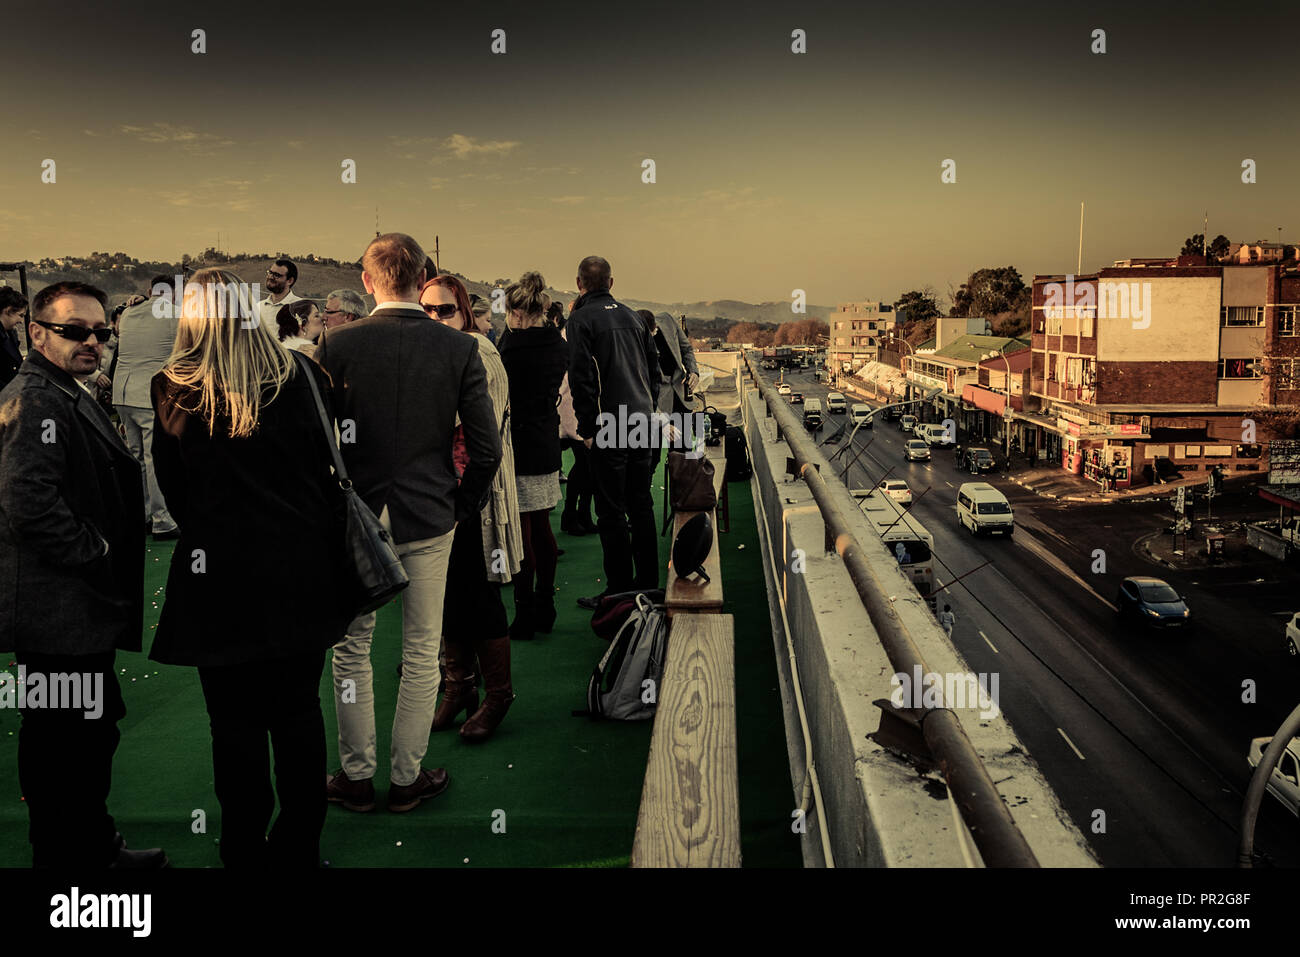 A wedding party celebrates on the roof of the Troyeville Hotel in east Johannesburg, South Africa Stock Photo